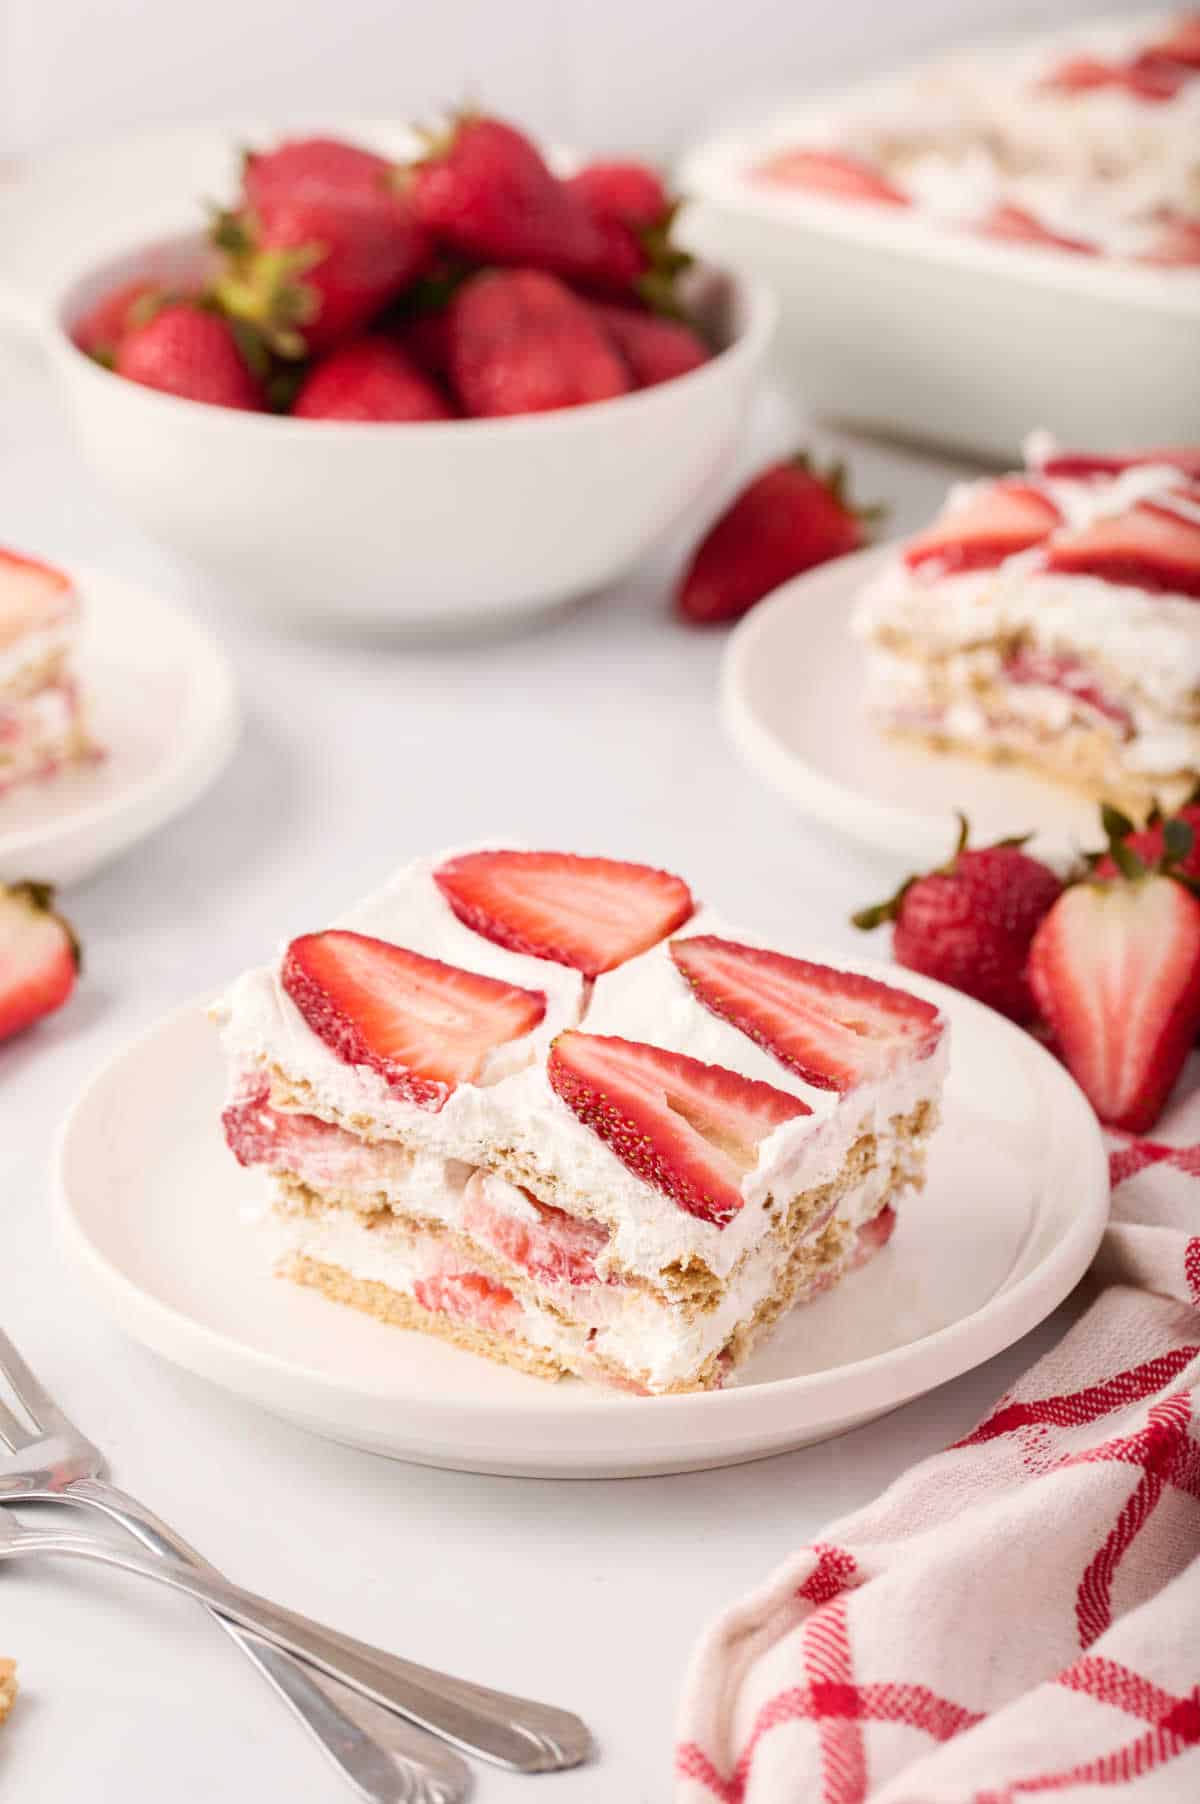 A slice of strawberry icebox cake on a plate.